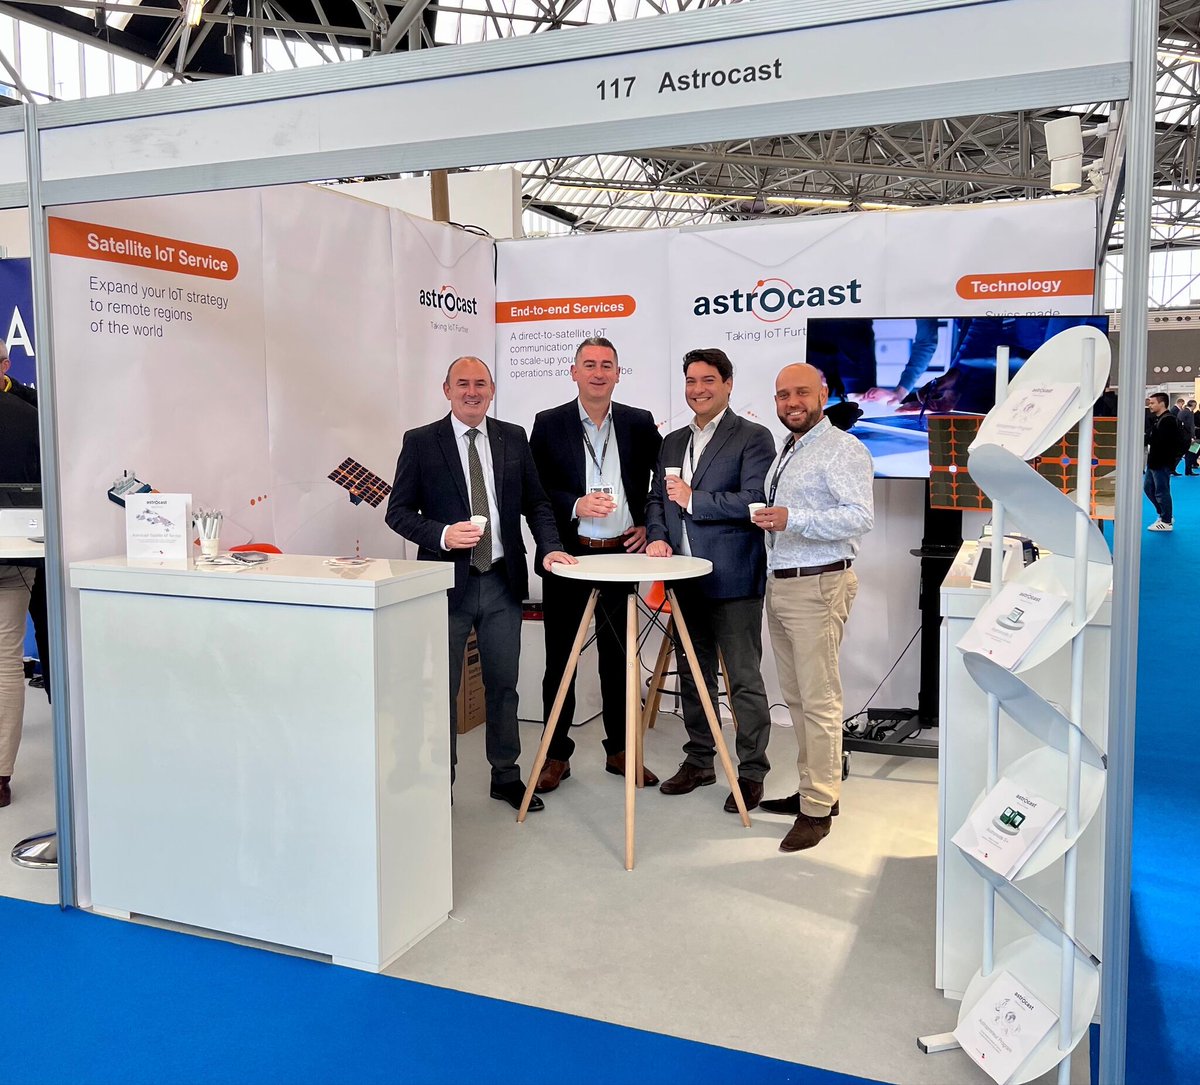 We are at #IoTExpo Europe in #Amsterdam!
☕ Meet @strocast at booth 117 & grab a coffee while learning how we are taking IoT further with a cost-effective, comprehensive #SatIoT Service. 🛰️ 

✅ More info & bookings:  astrocast.com/news/astrocast… 

#IoTsolutions #IoTtracking #iottech